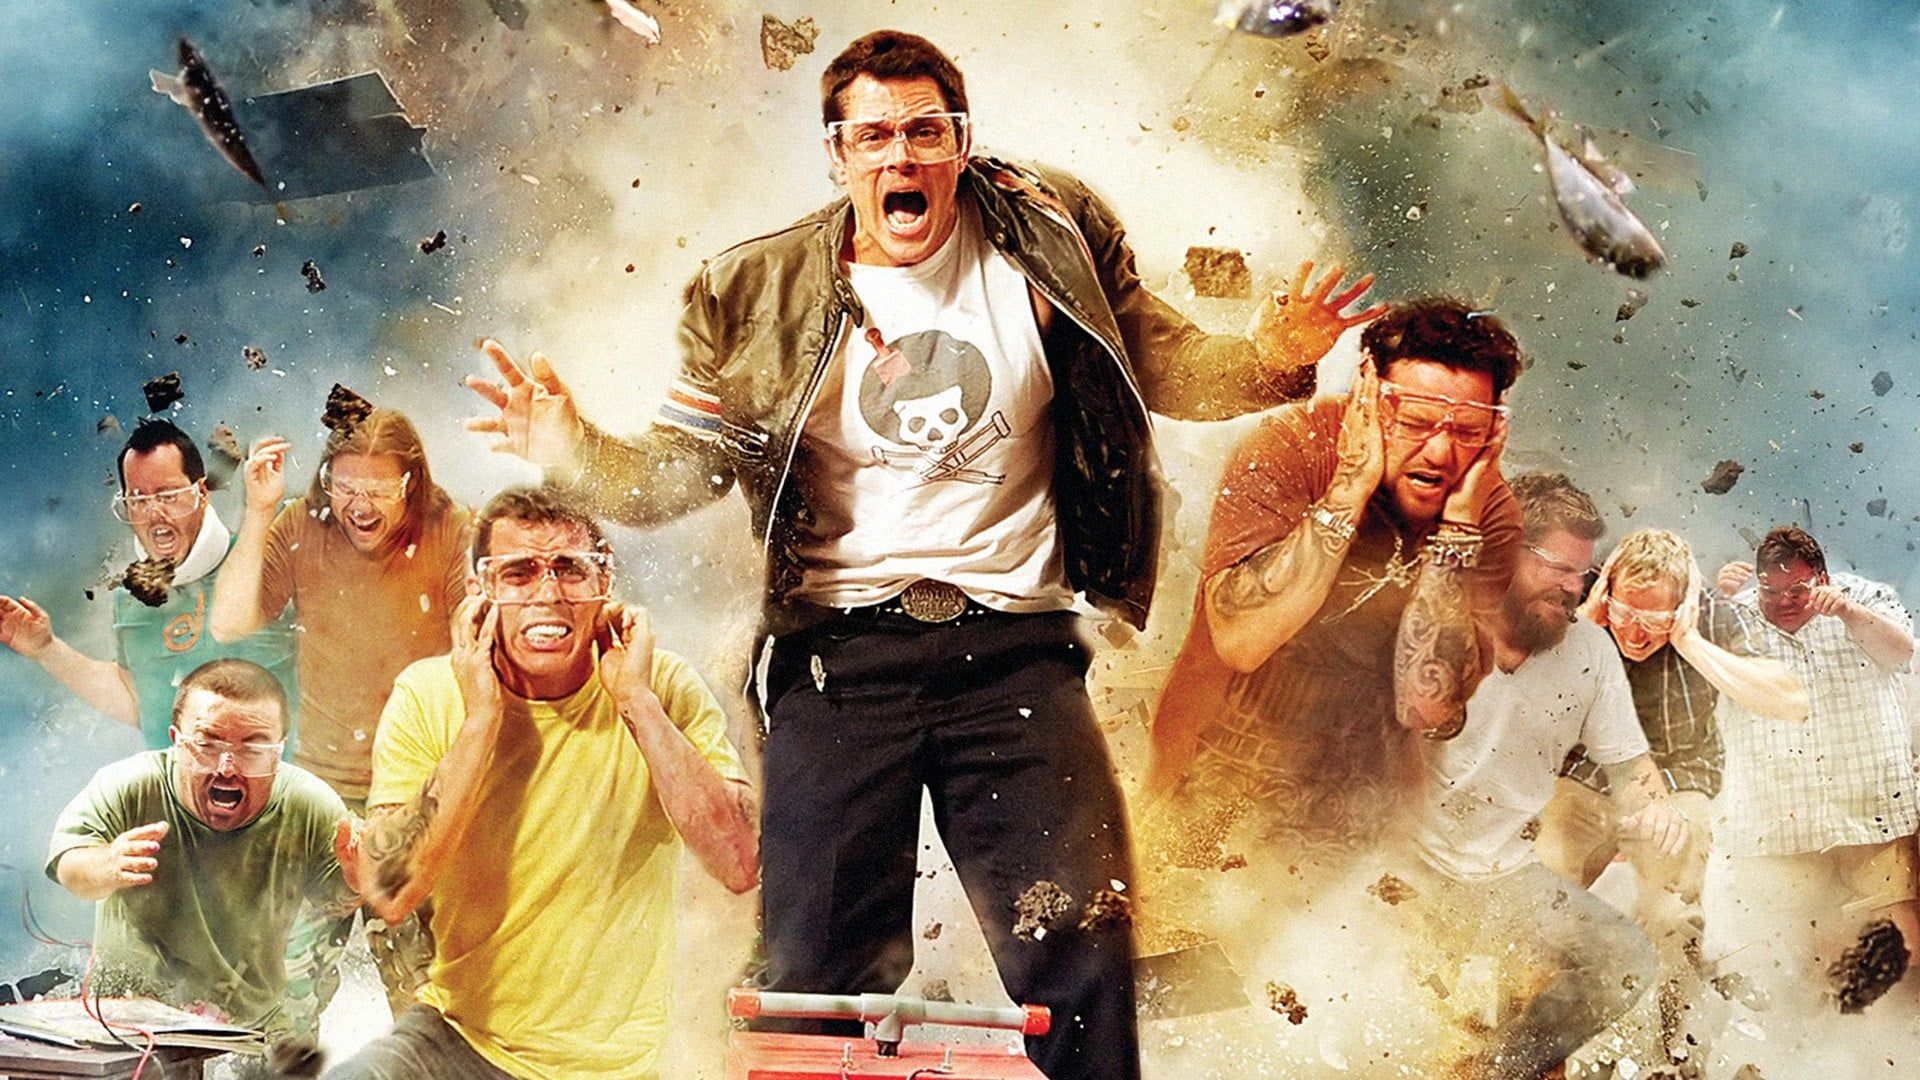 Johnny Knoxville and Jackass Crew Posing for Movie Poster